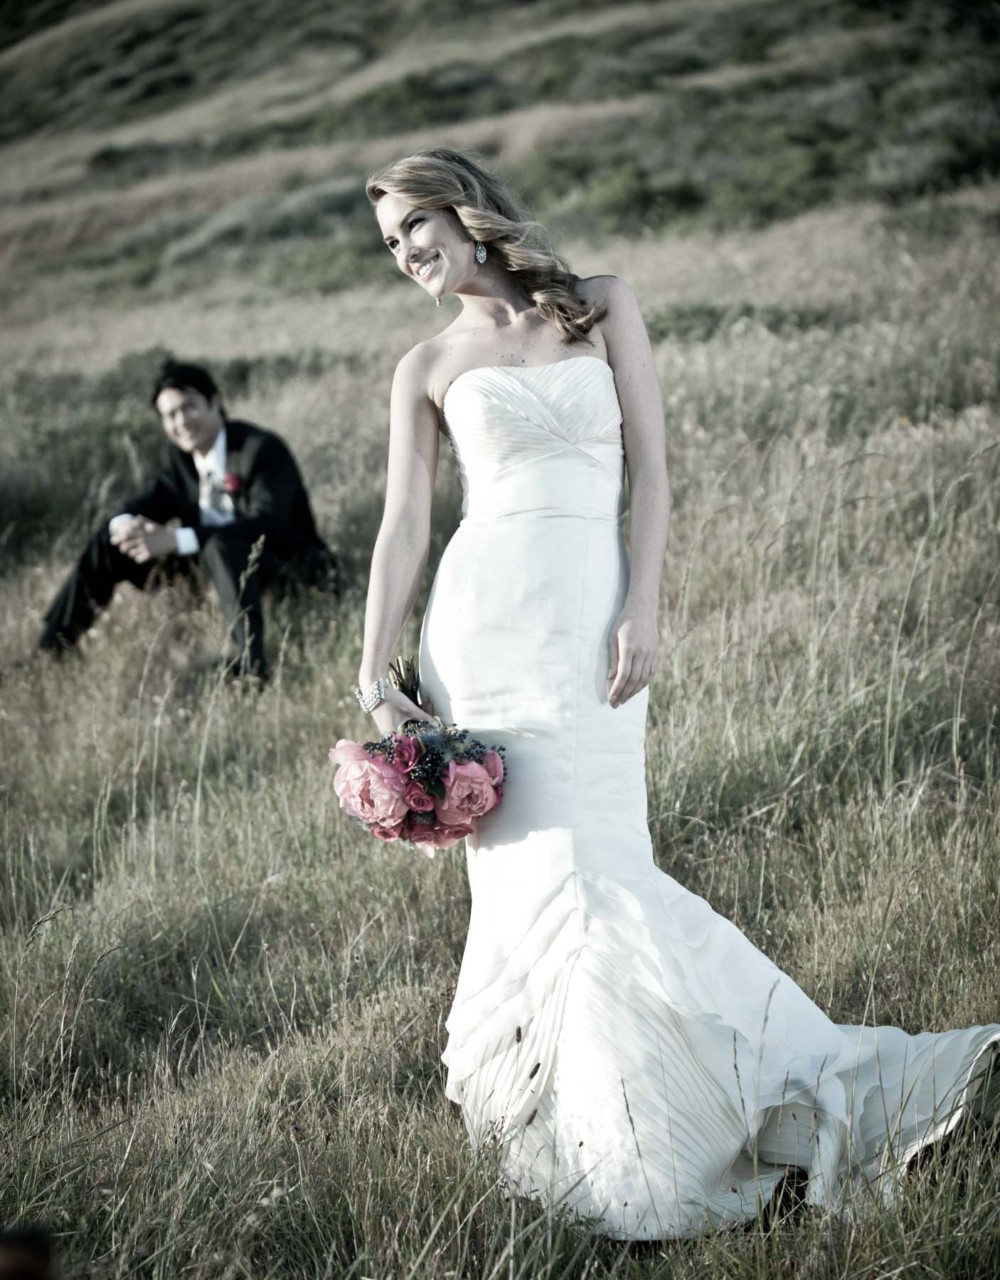 Looking for a local wedding photographer in Chugiak?